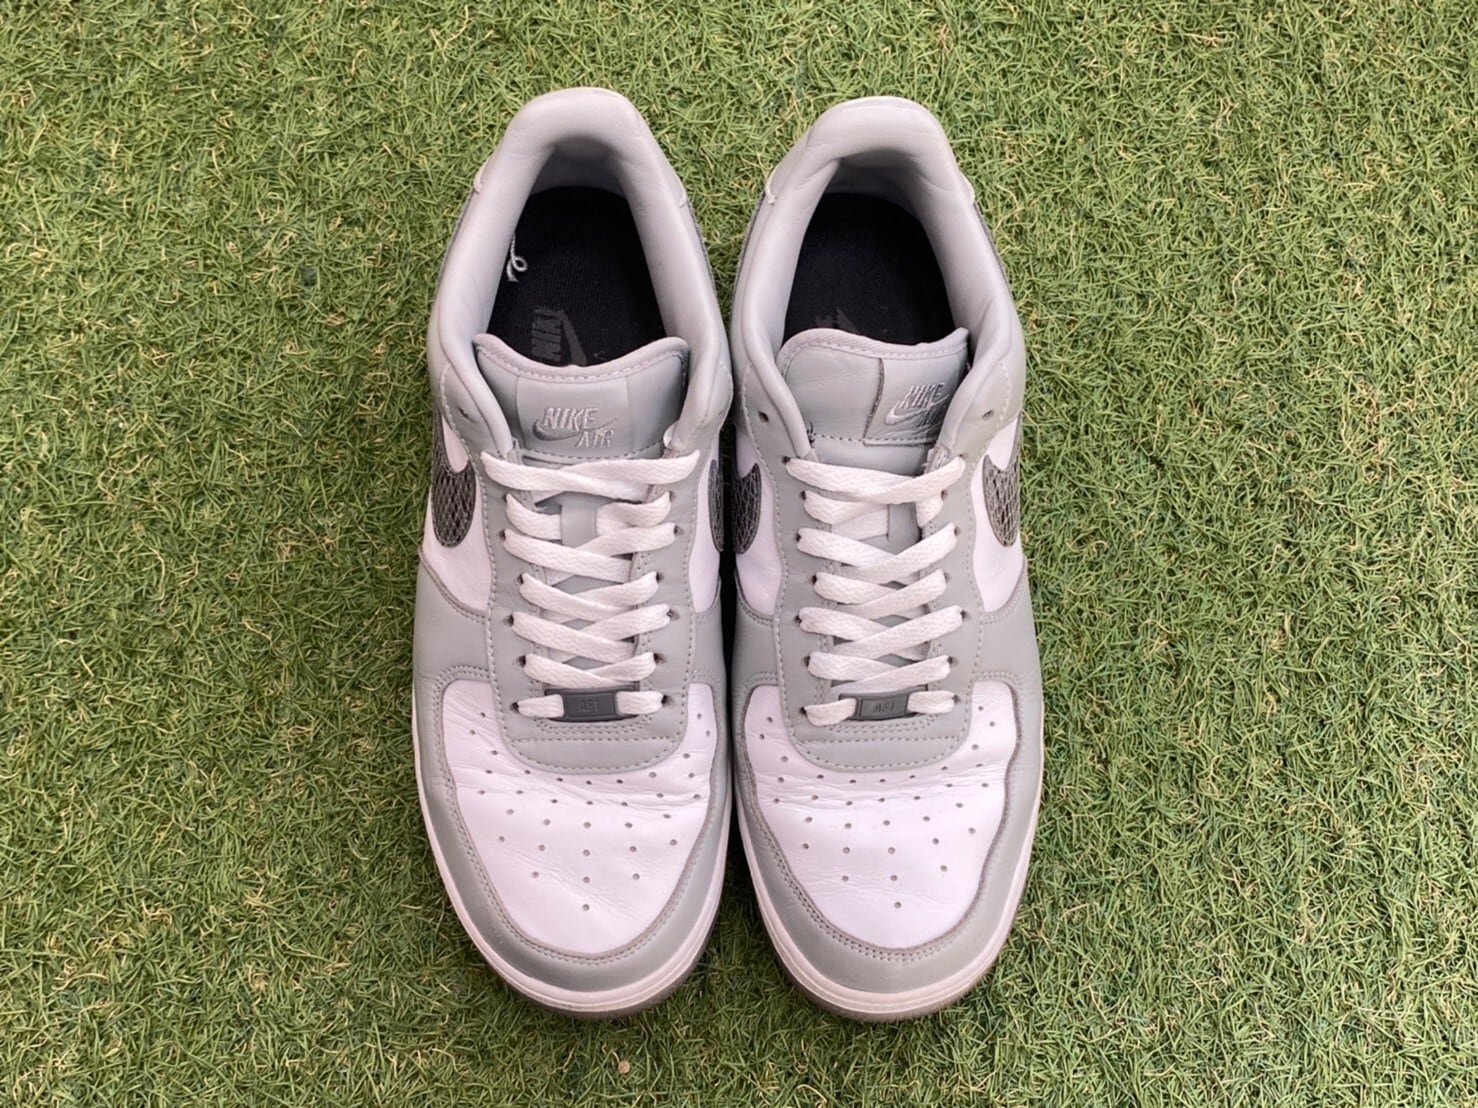 NIKE BY YOU × UNLOCKED AIR FORCE 1 LOW WHITE/GREY SWOOSH SNAKE